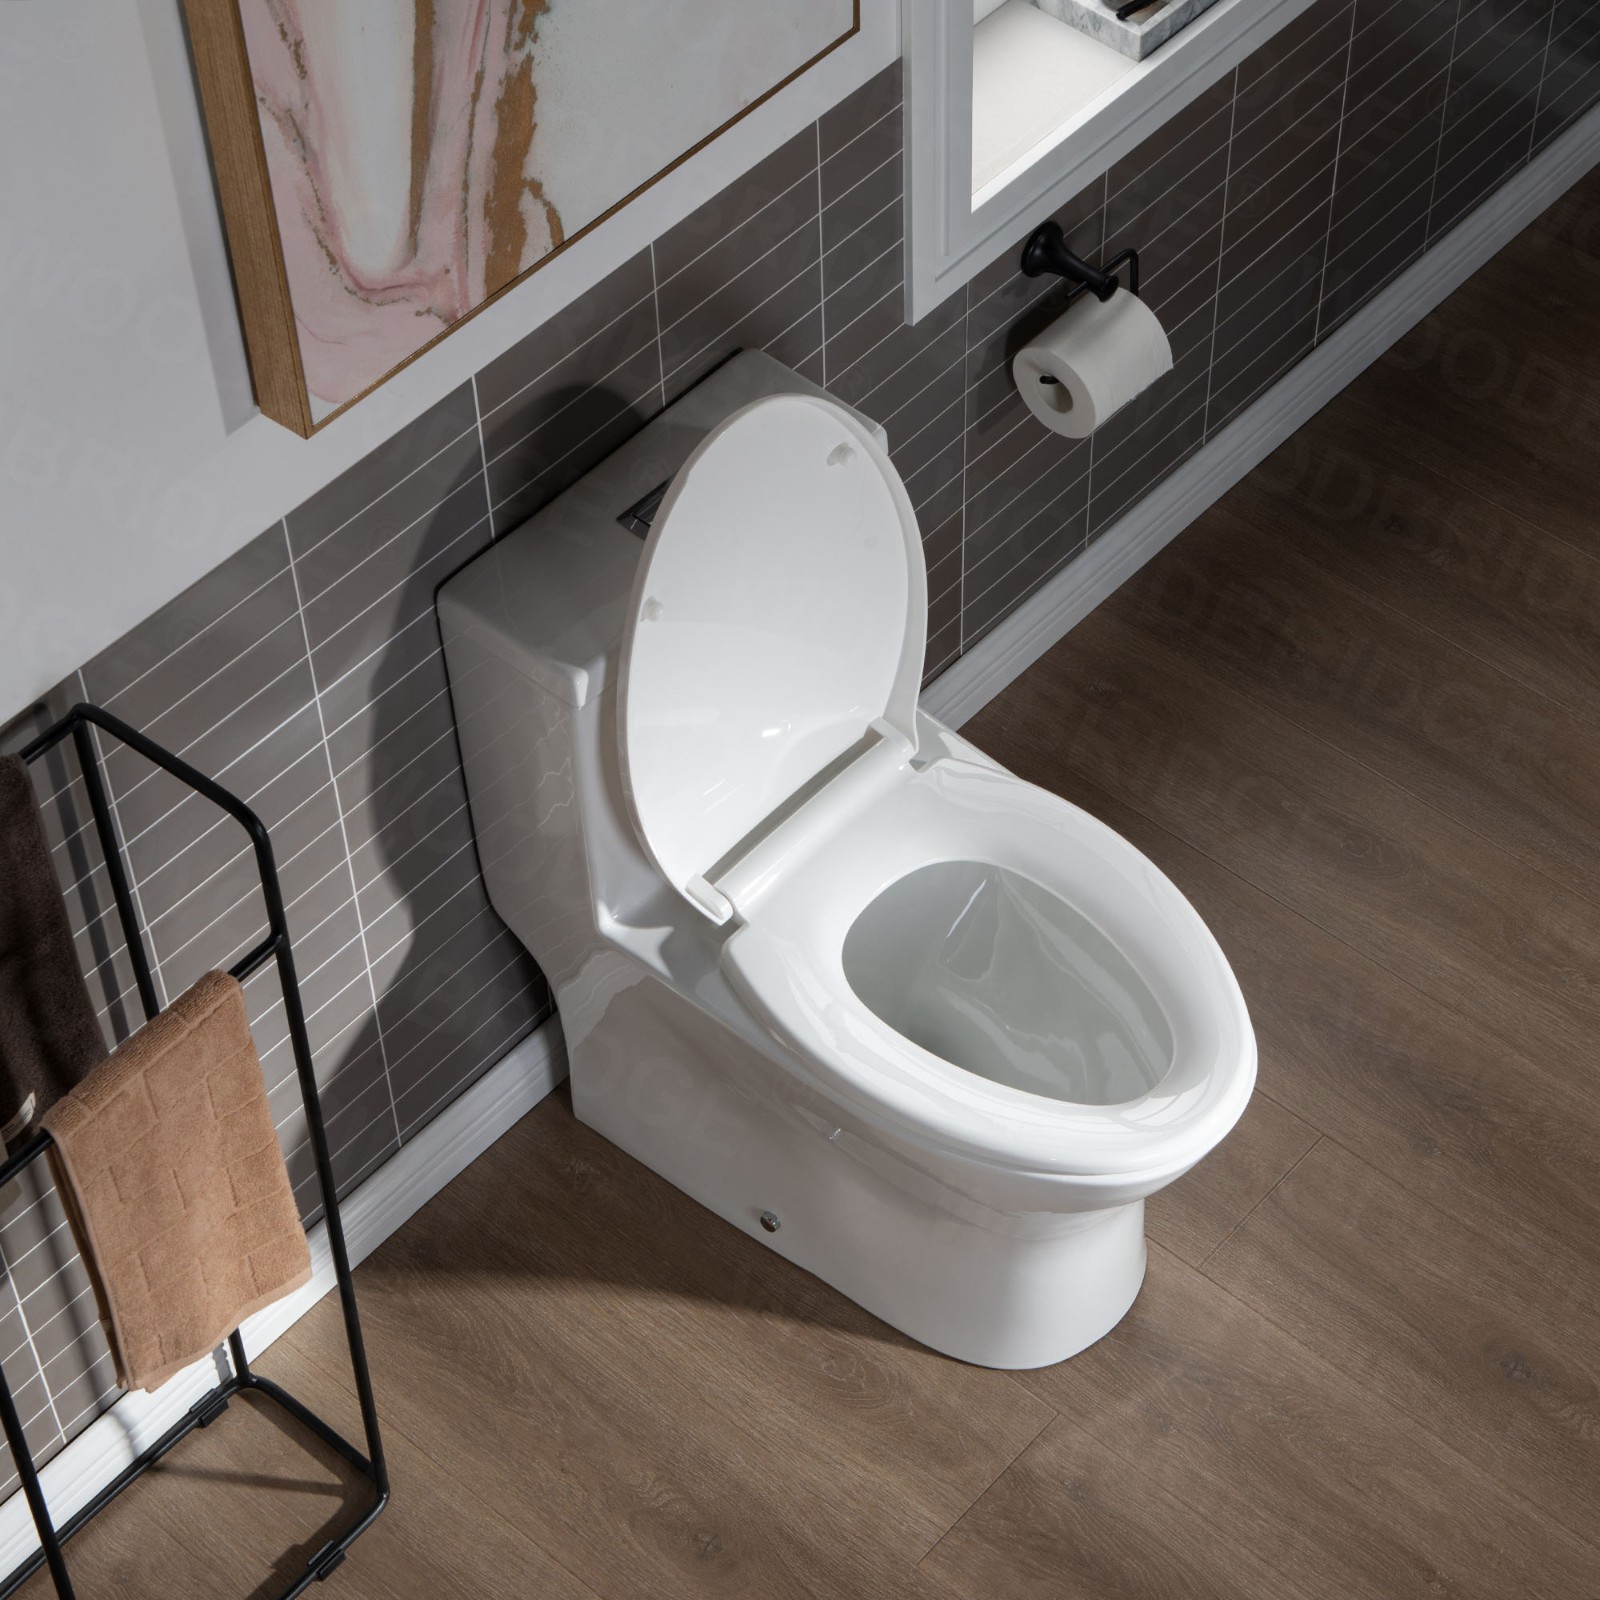  WOODBRIDGE Moder Design, Elongated One piece Toilet Dual flush 1.0/1.6 GPF,with Soft Closing Seat, white, T-0032(2 -Pack)_6487